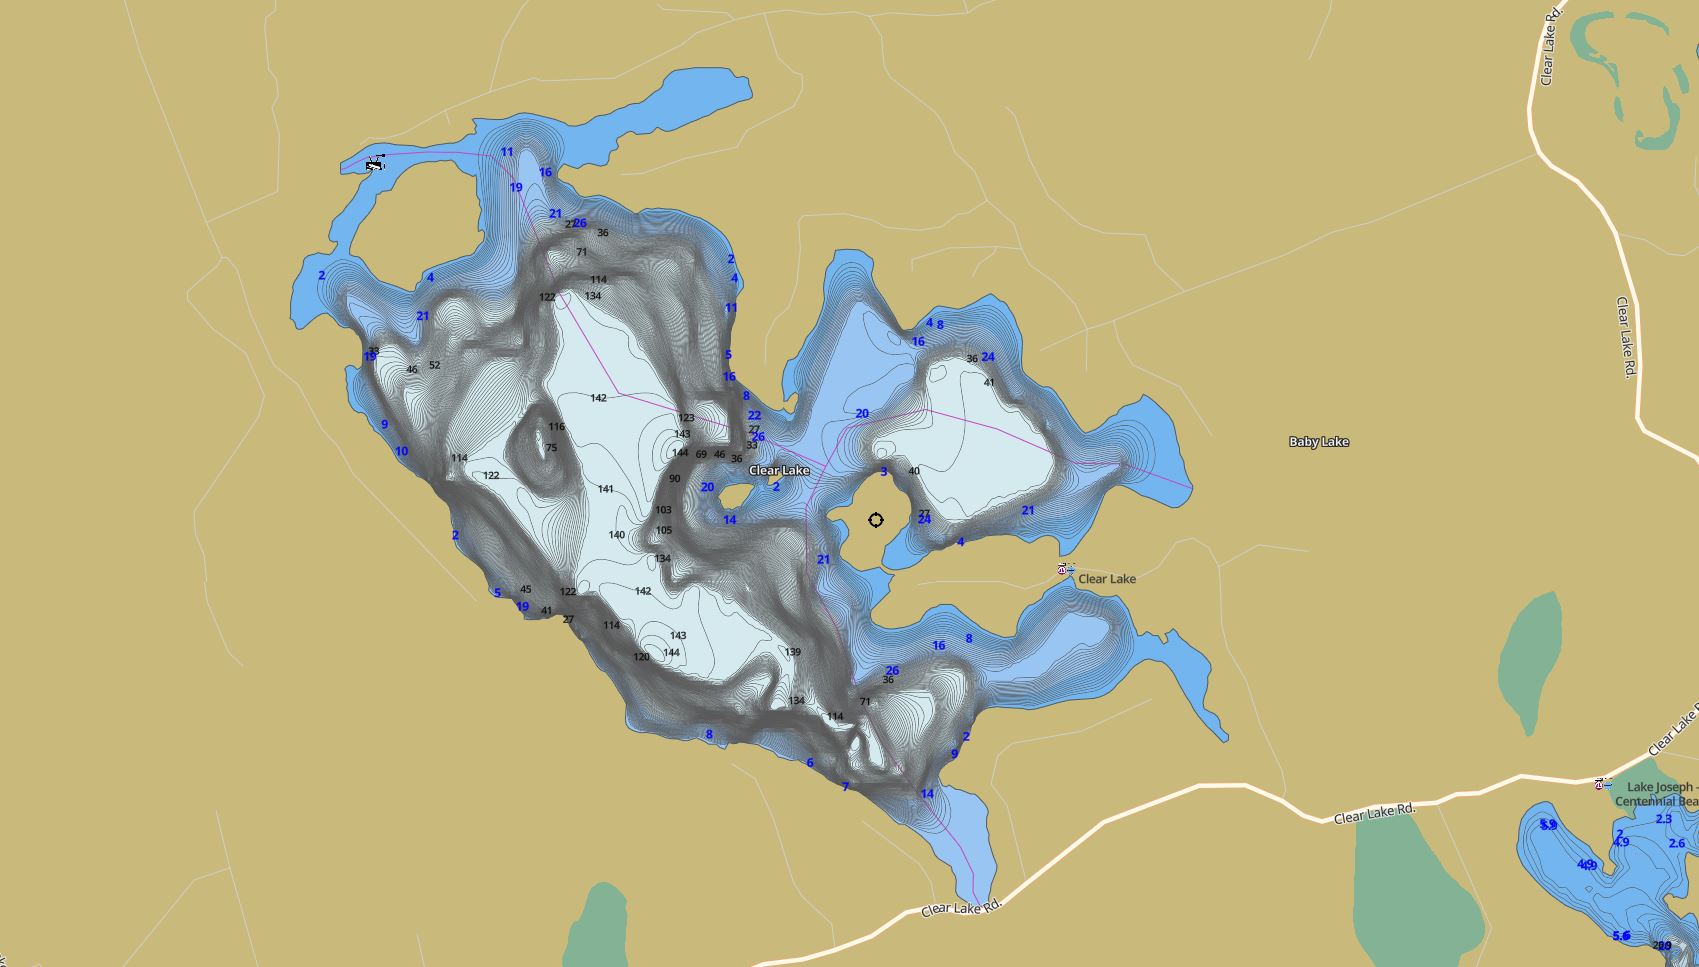 Contour Map of Clear Lake in Municipality of Seguin and the District of Parry Sound